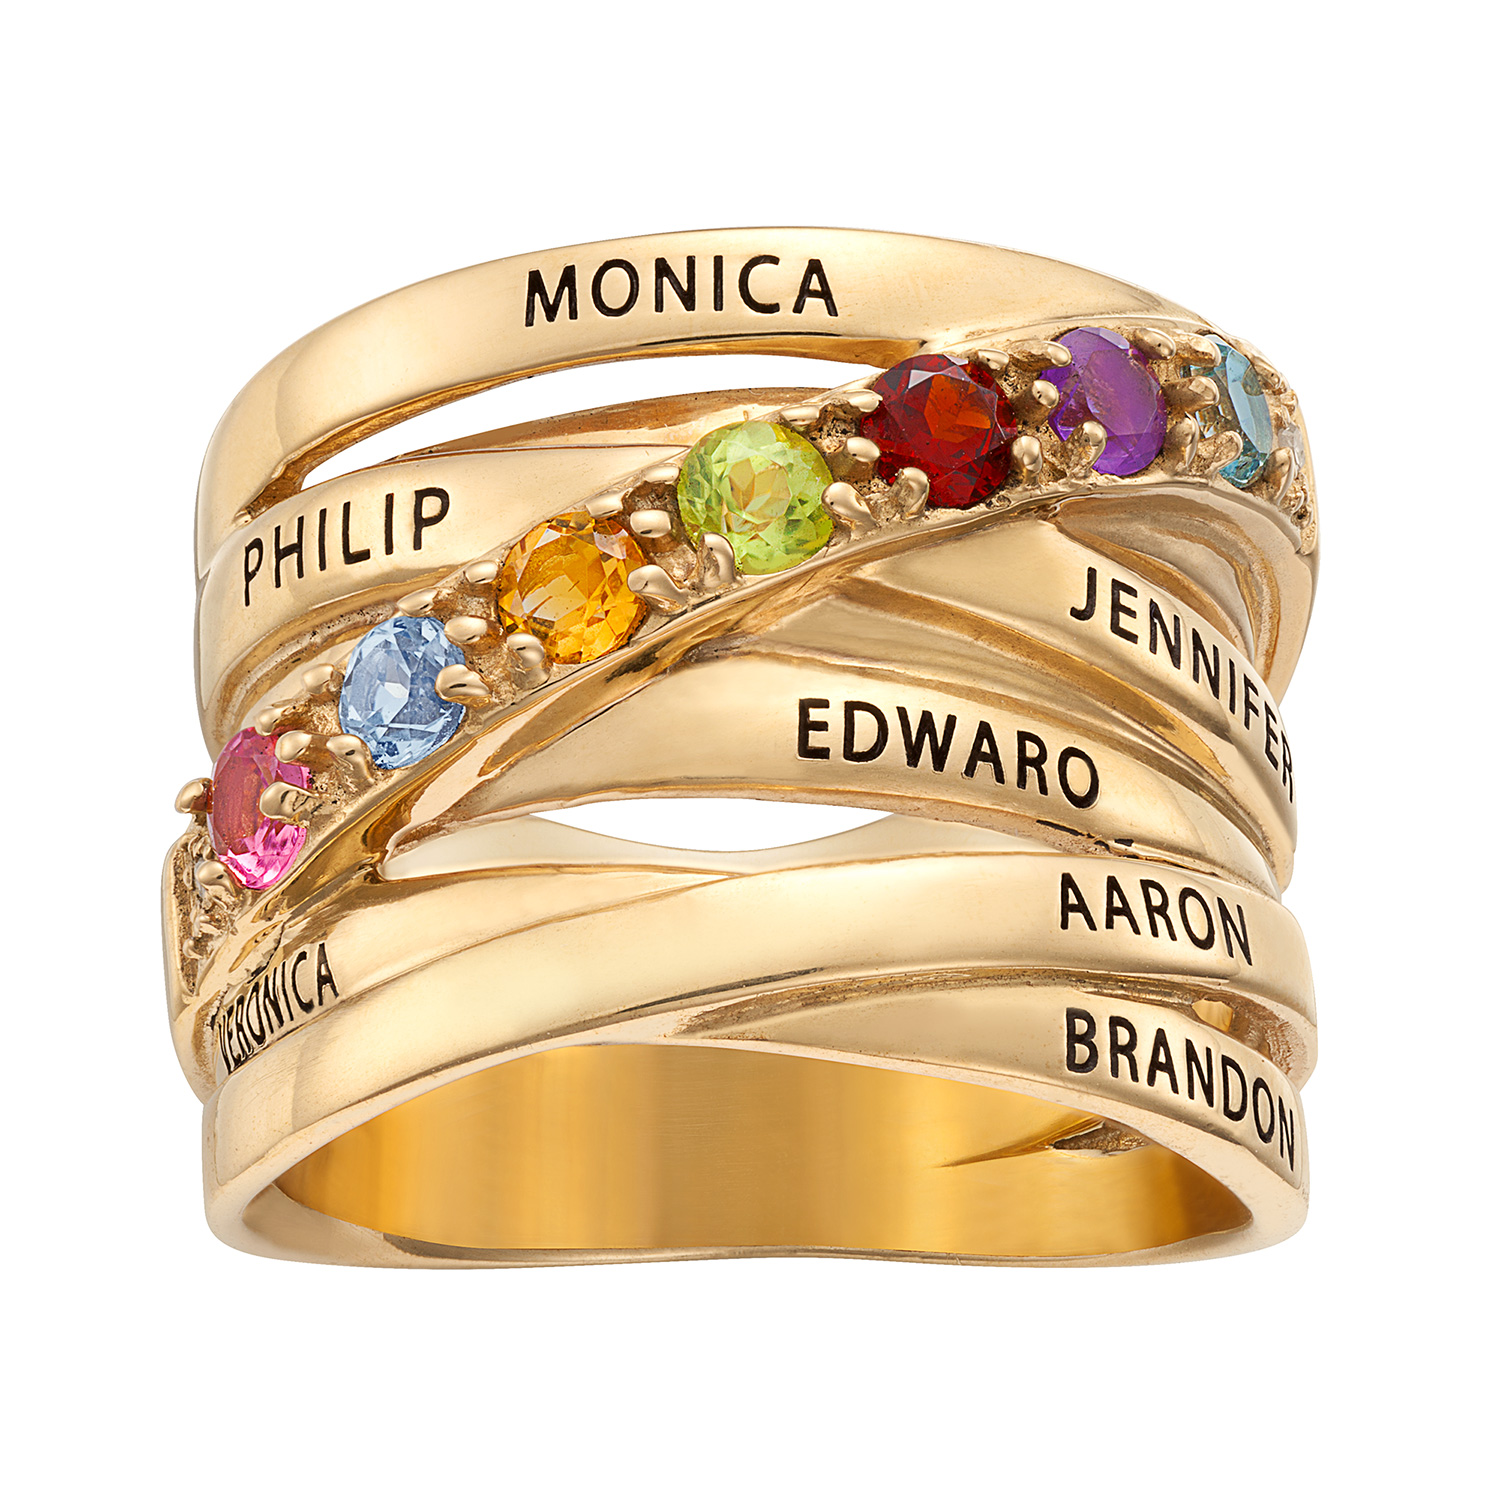 14K Gold over Sterling Name and Genuine Birthstone Ring with Diamond Accent